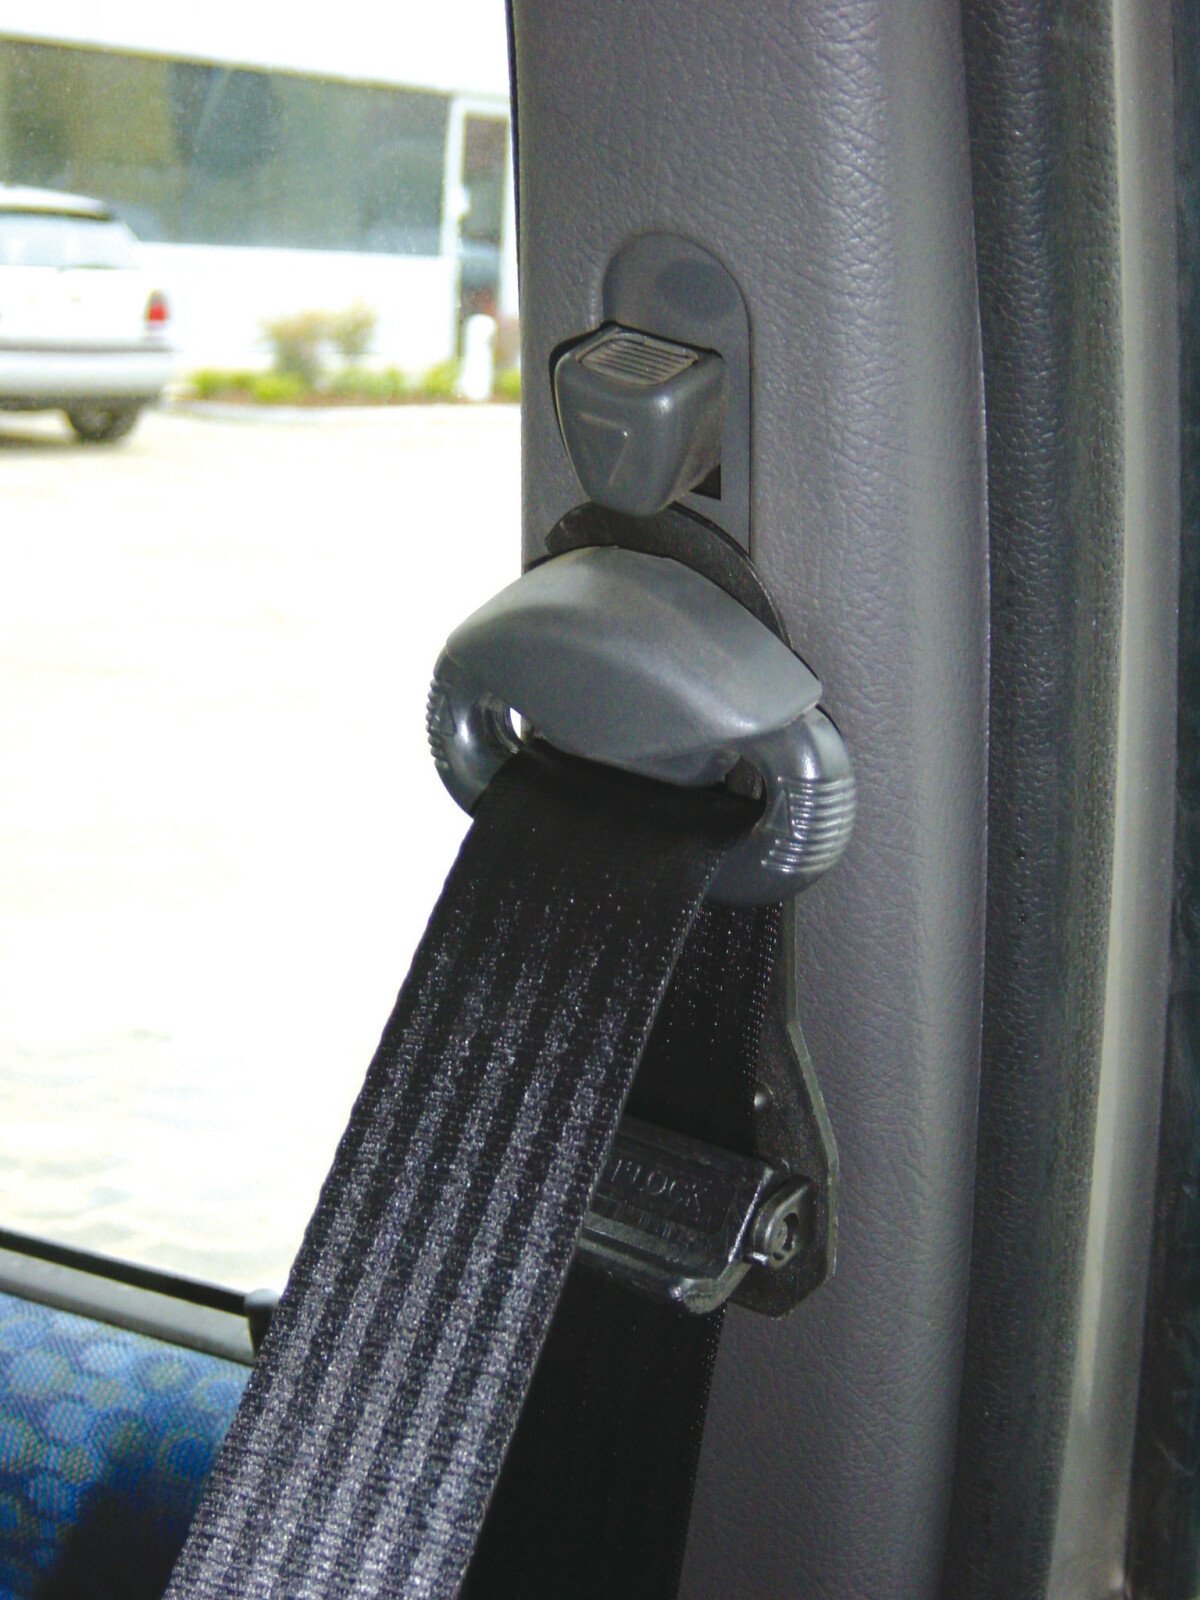 Safety belt clips (pair-pack) thumb